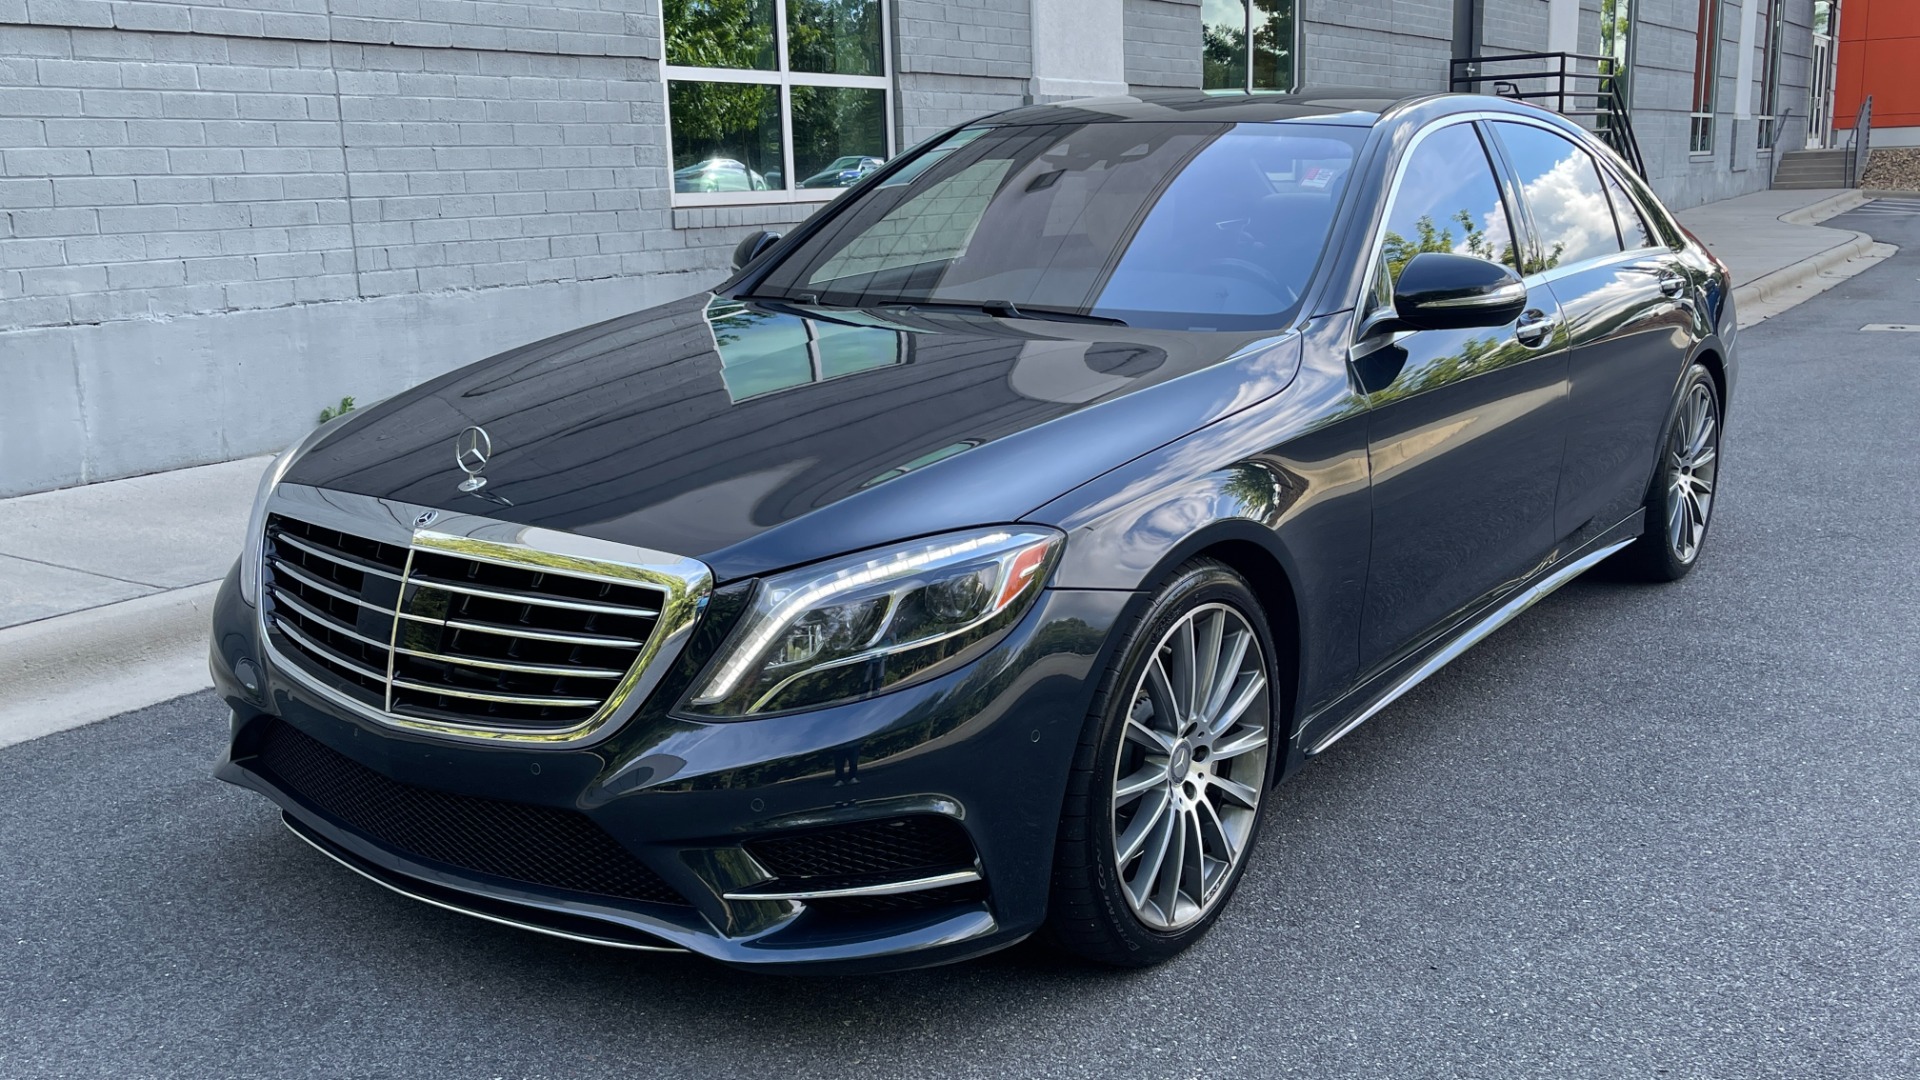 Used 2015 Mercedes-Benz S-Class S550 / REAR SEATING PACKAGE / PREMIUM / DRIVER ASSISTANCE for sale Sold at Formula Imports in Charlotte NC 28227 4